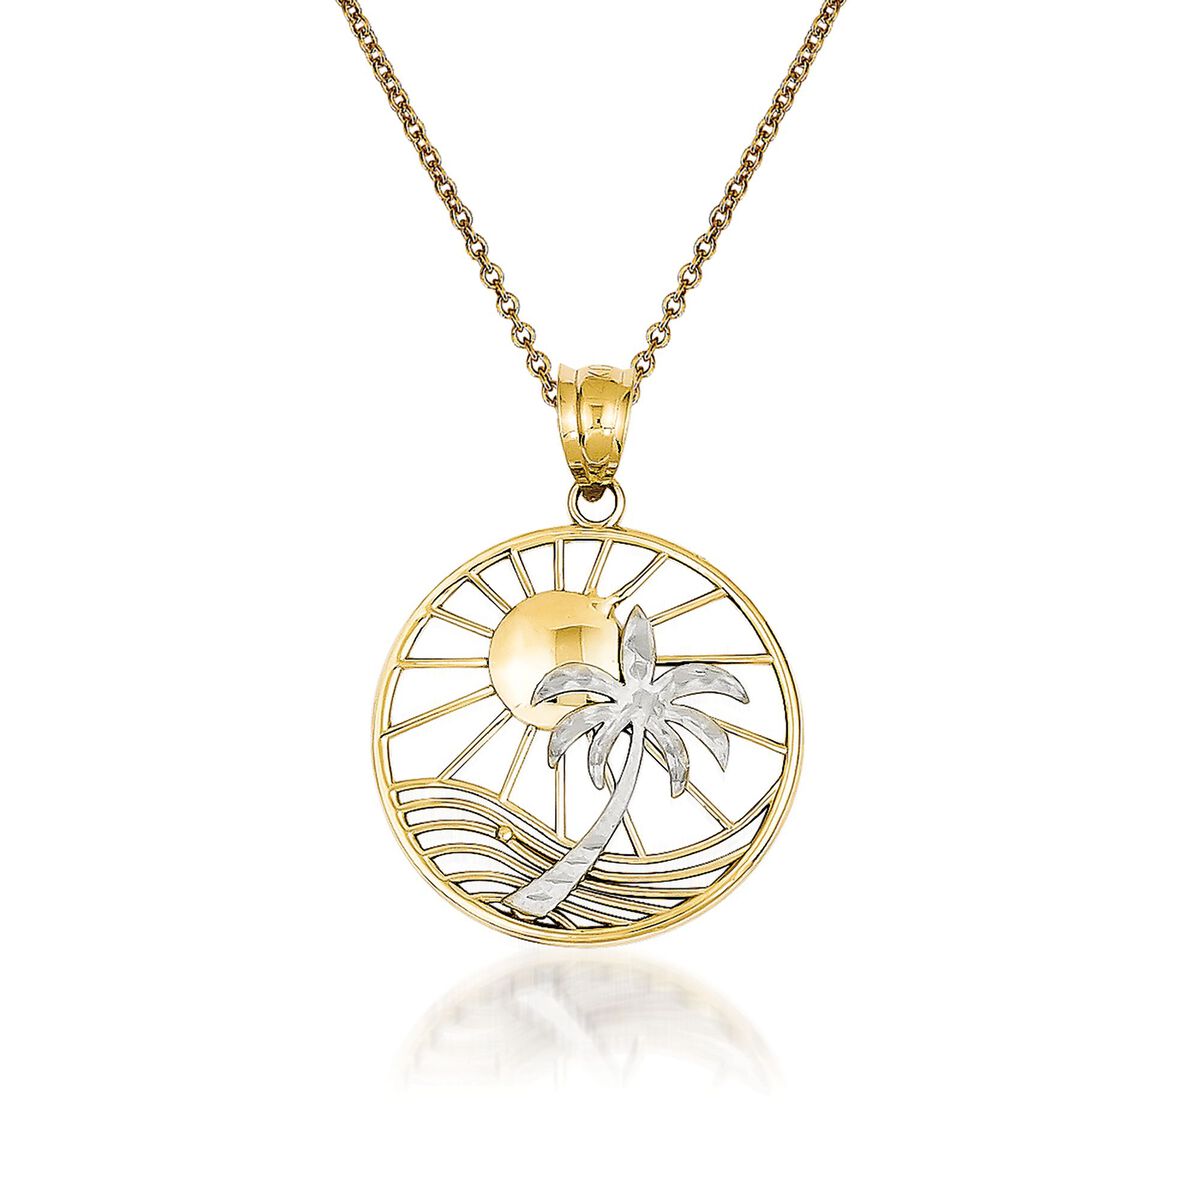 14k Yellow Gold or White Gold or Two-Tone Palm Tree with Crescent Moon Pendant Necklace 